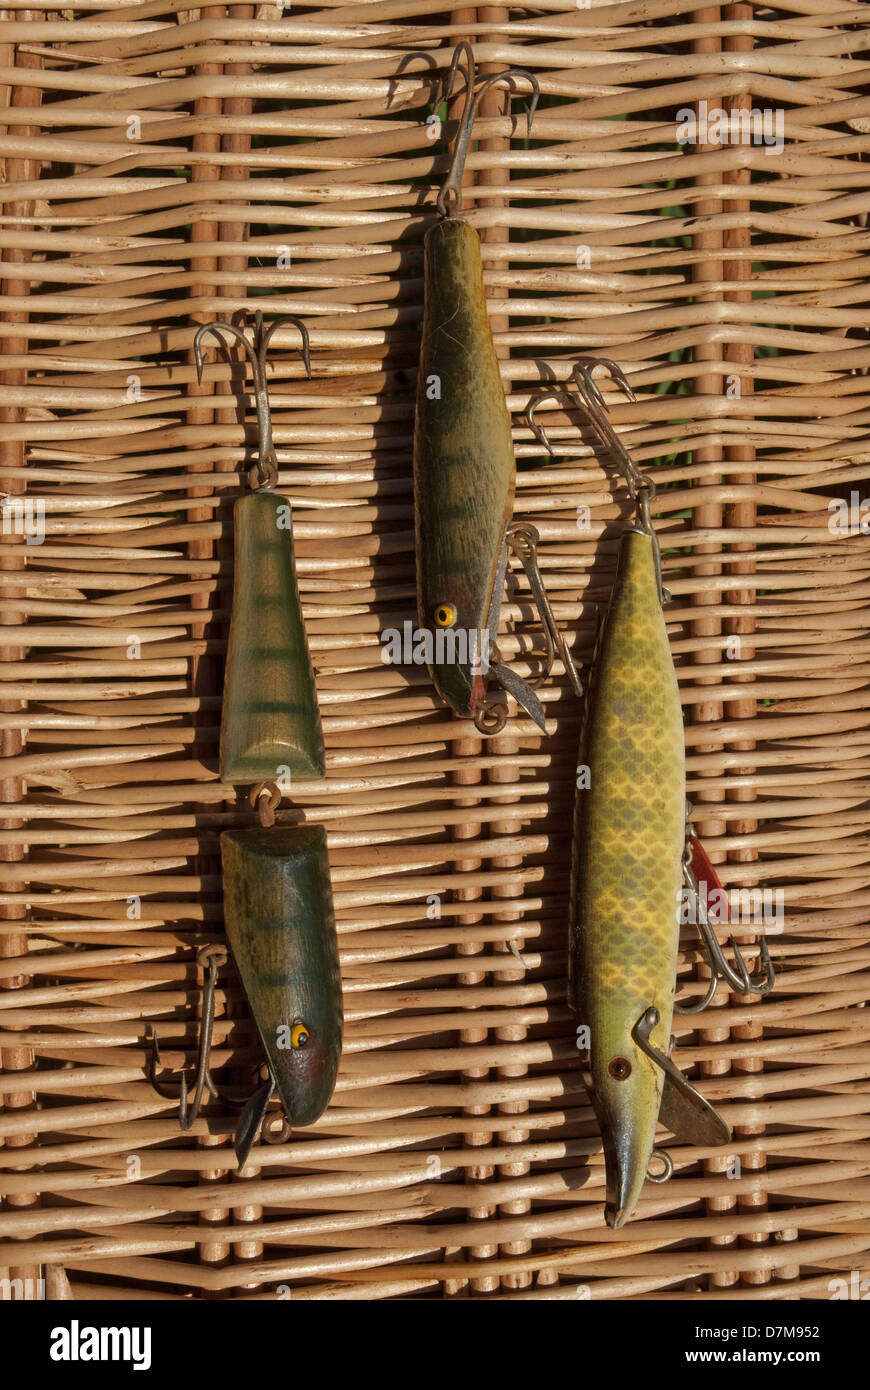 https://c8.alamy.com/comp/D7M952/a-selection-of-vintage-pike-fishing-lures-D7M952.jpg